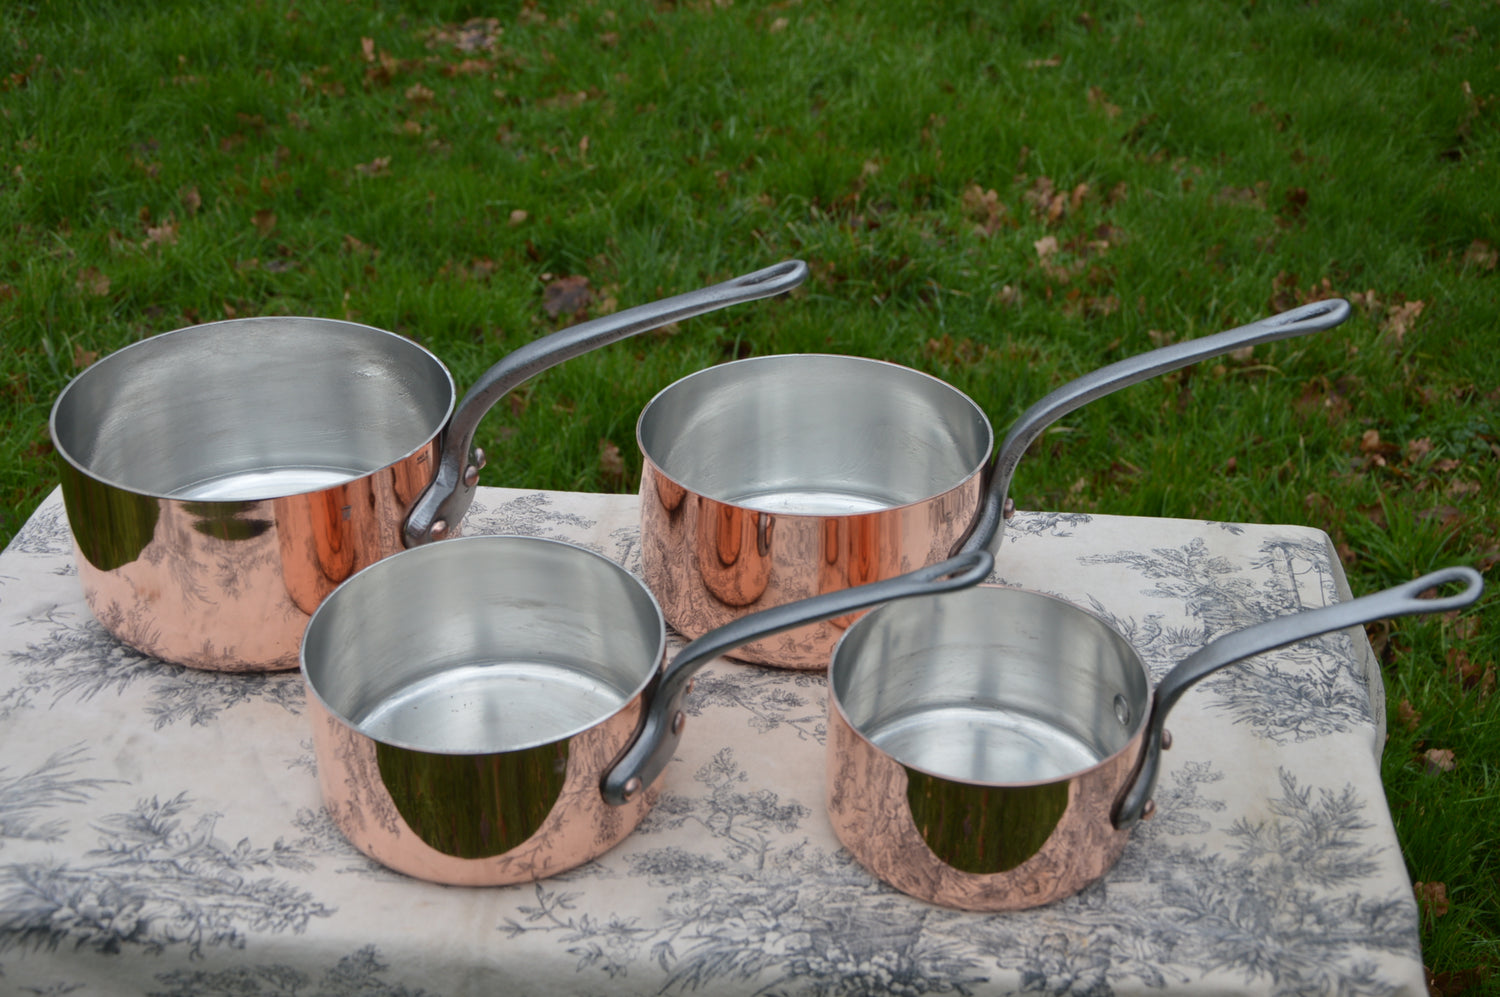 Vintage and Antique Copper Collection - FREE SHIPPING WORLDWIDE - Pots, Pans, Moulds, Au gratins everything you can think of!